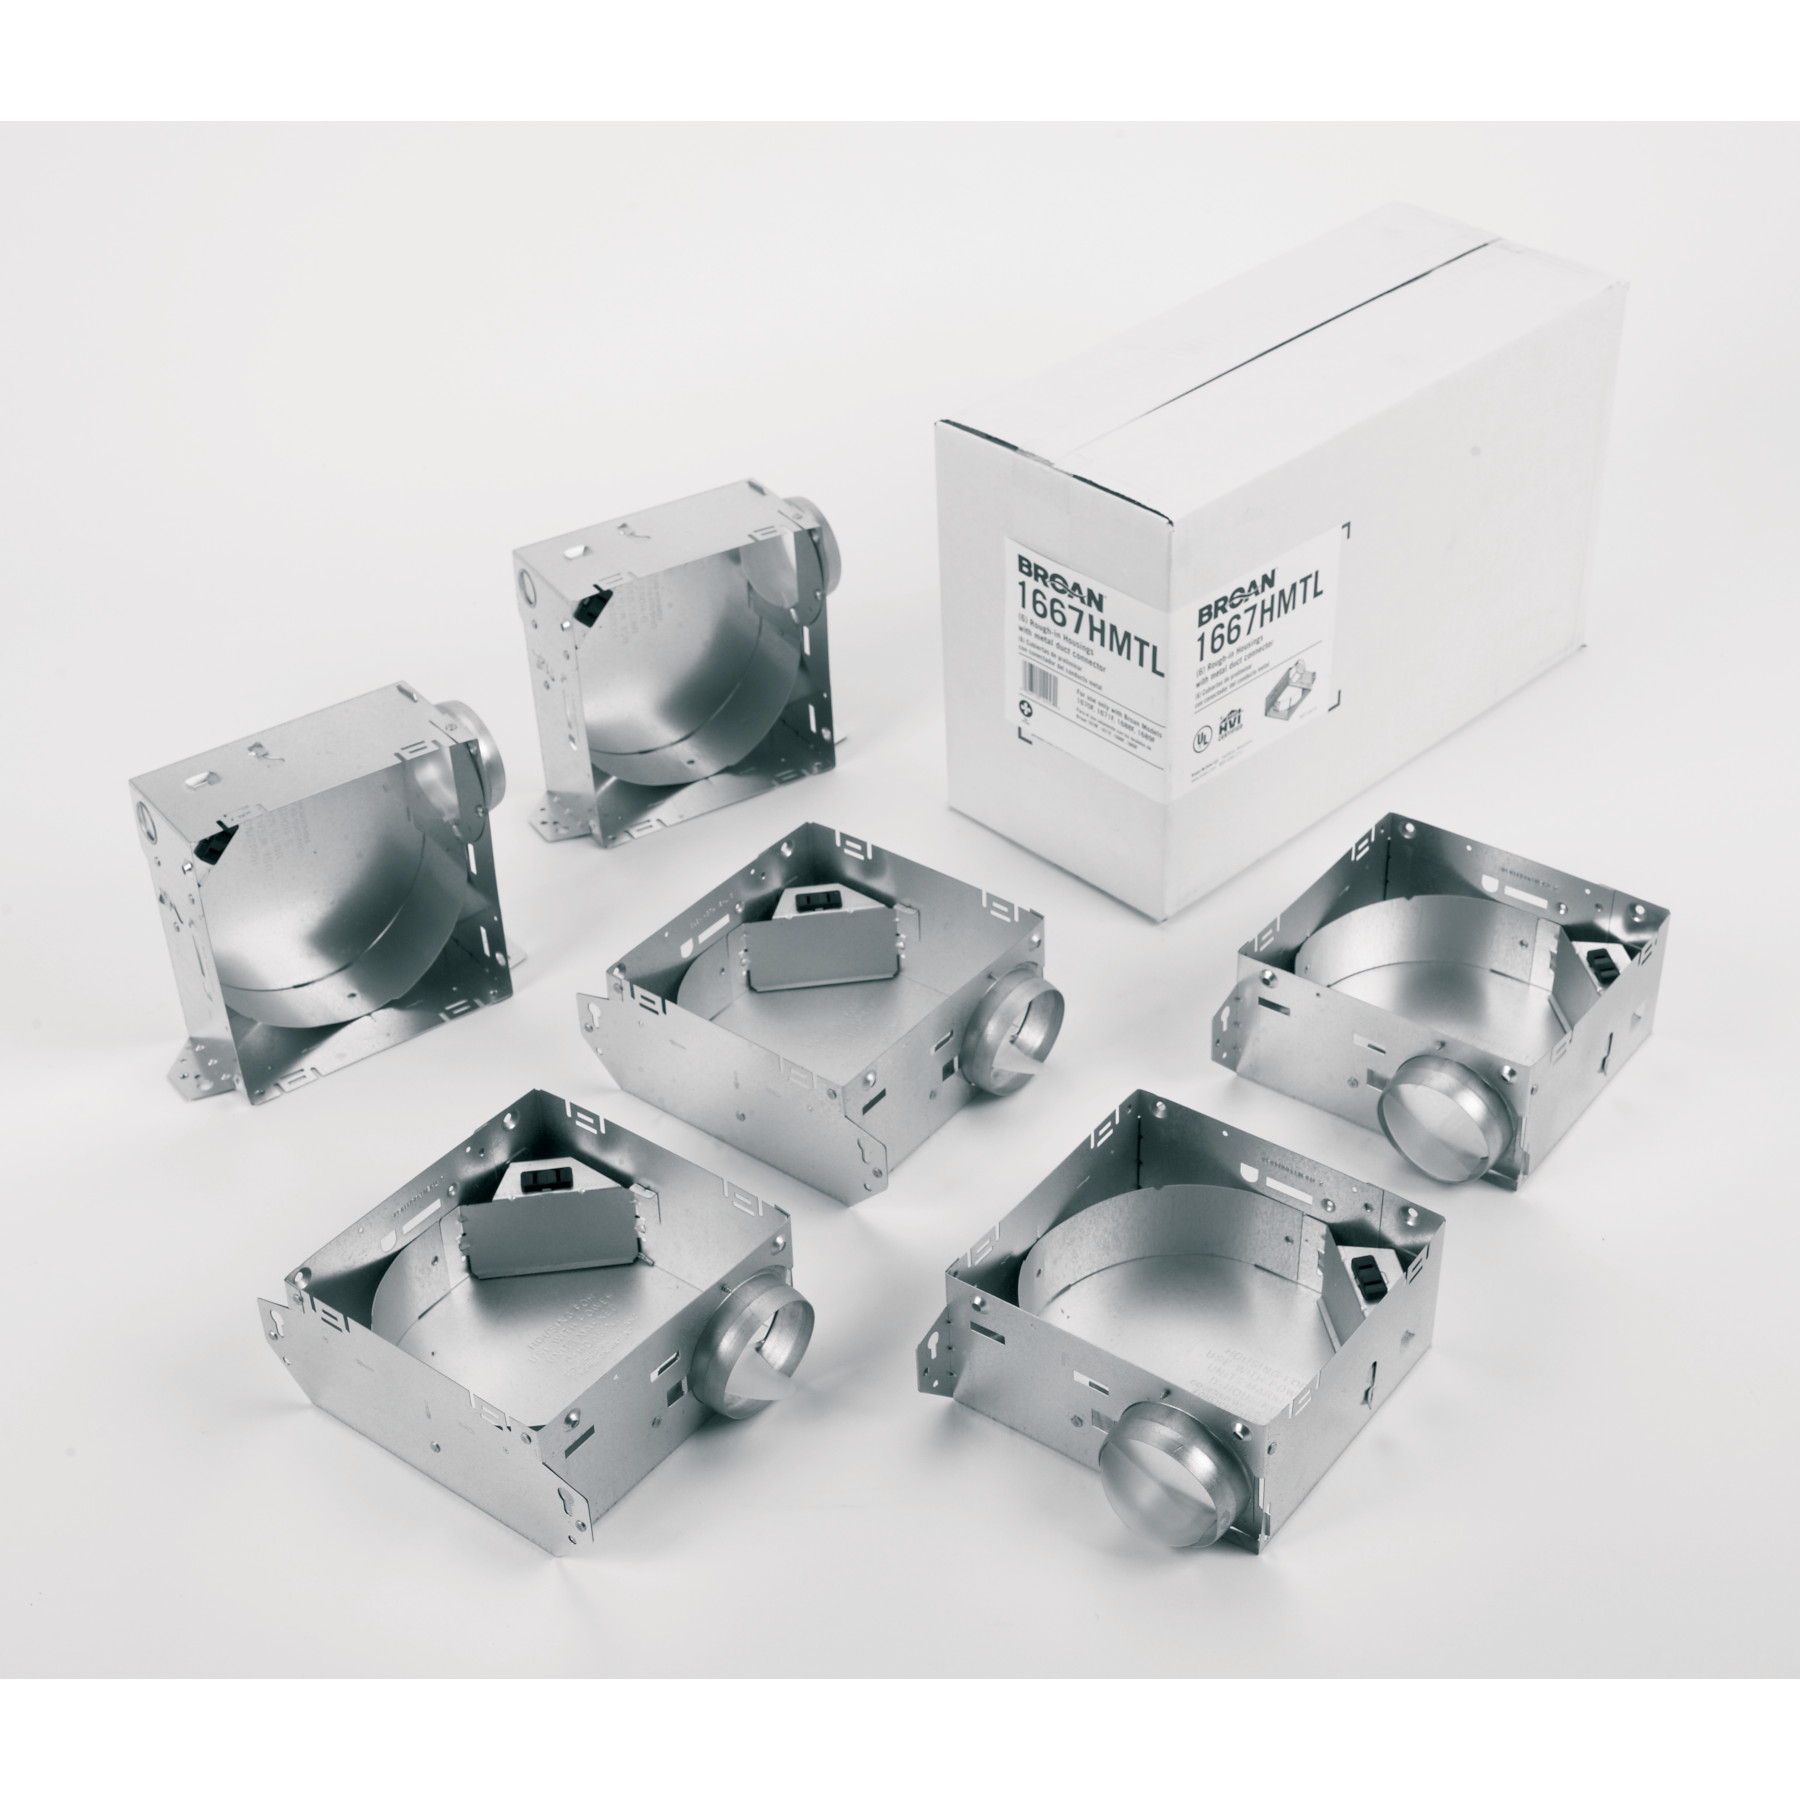 **DISCONTINUED** Broan® Ventilation Fan Housing Pack for 1670F, 1671F, 1688F, 1689F w/ Damper/Metal Duct Connector)